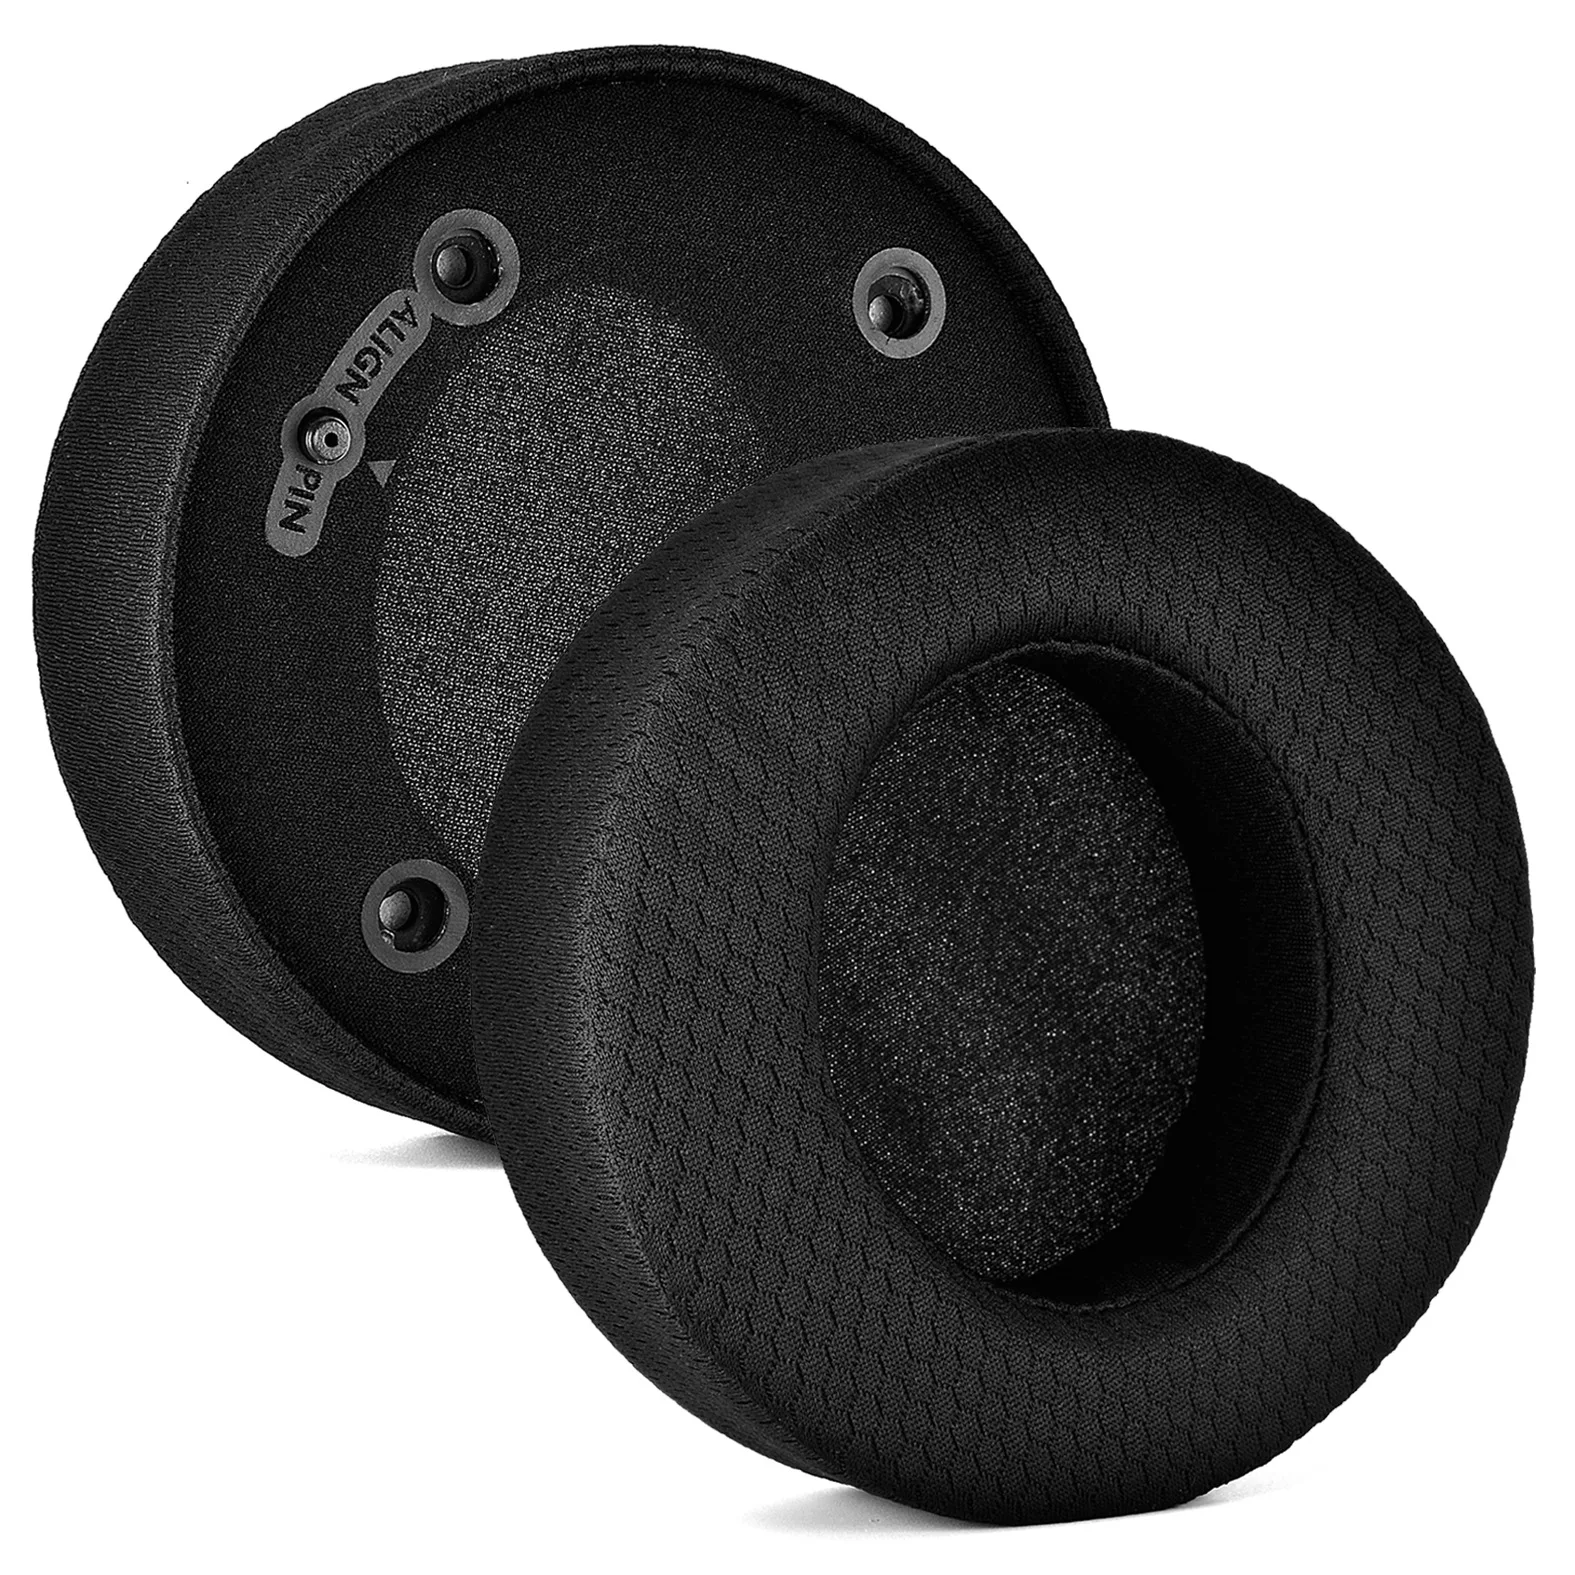 

Black Fabric Replacement Ear Pads Earpad Cushions Cover For Philips Audio Fidelio X2 HR X1 Wired Headphones